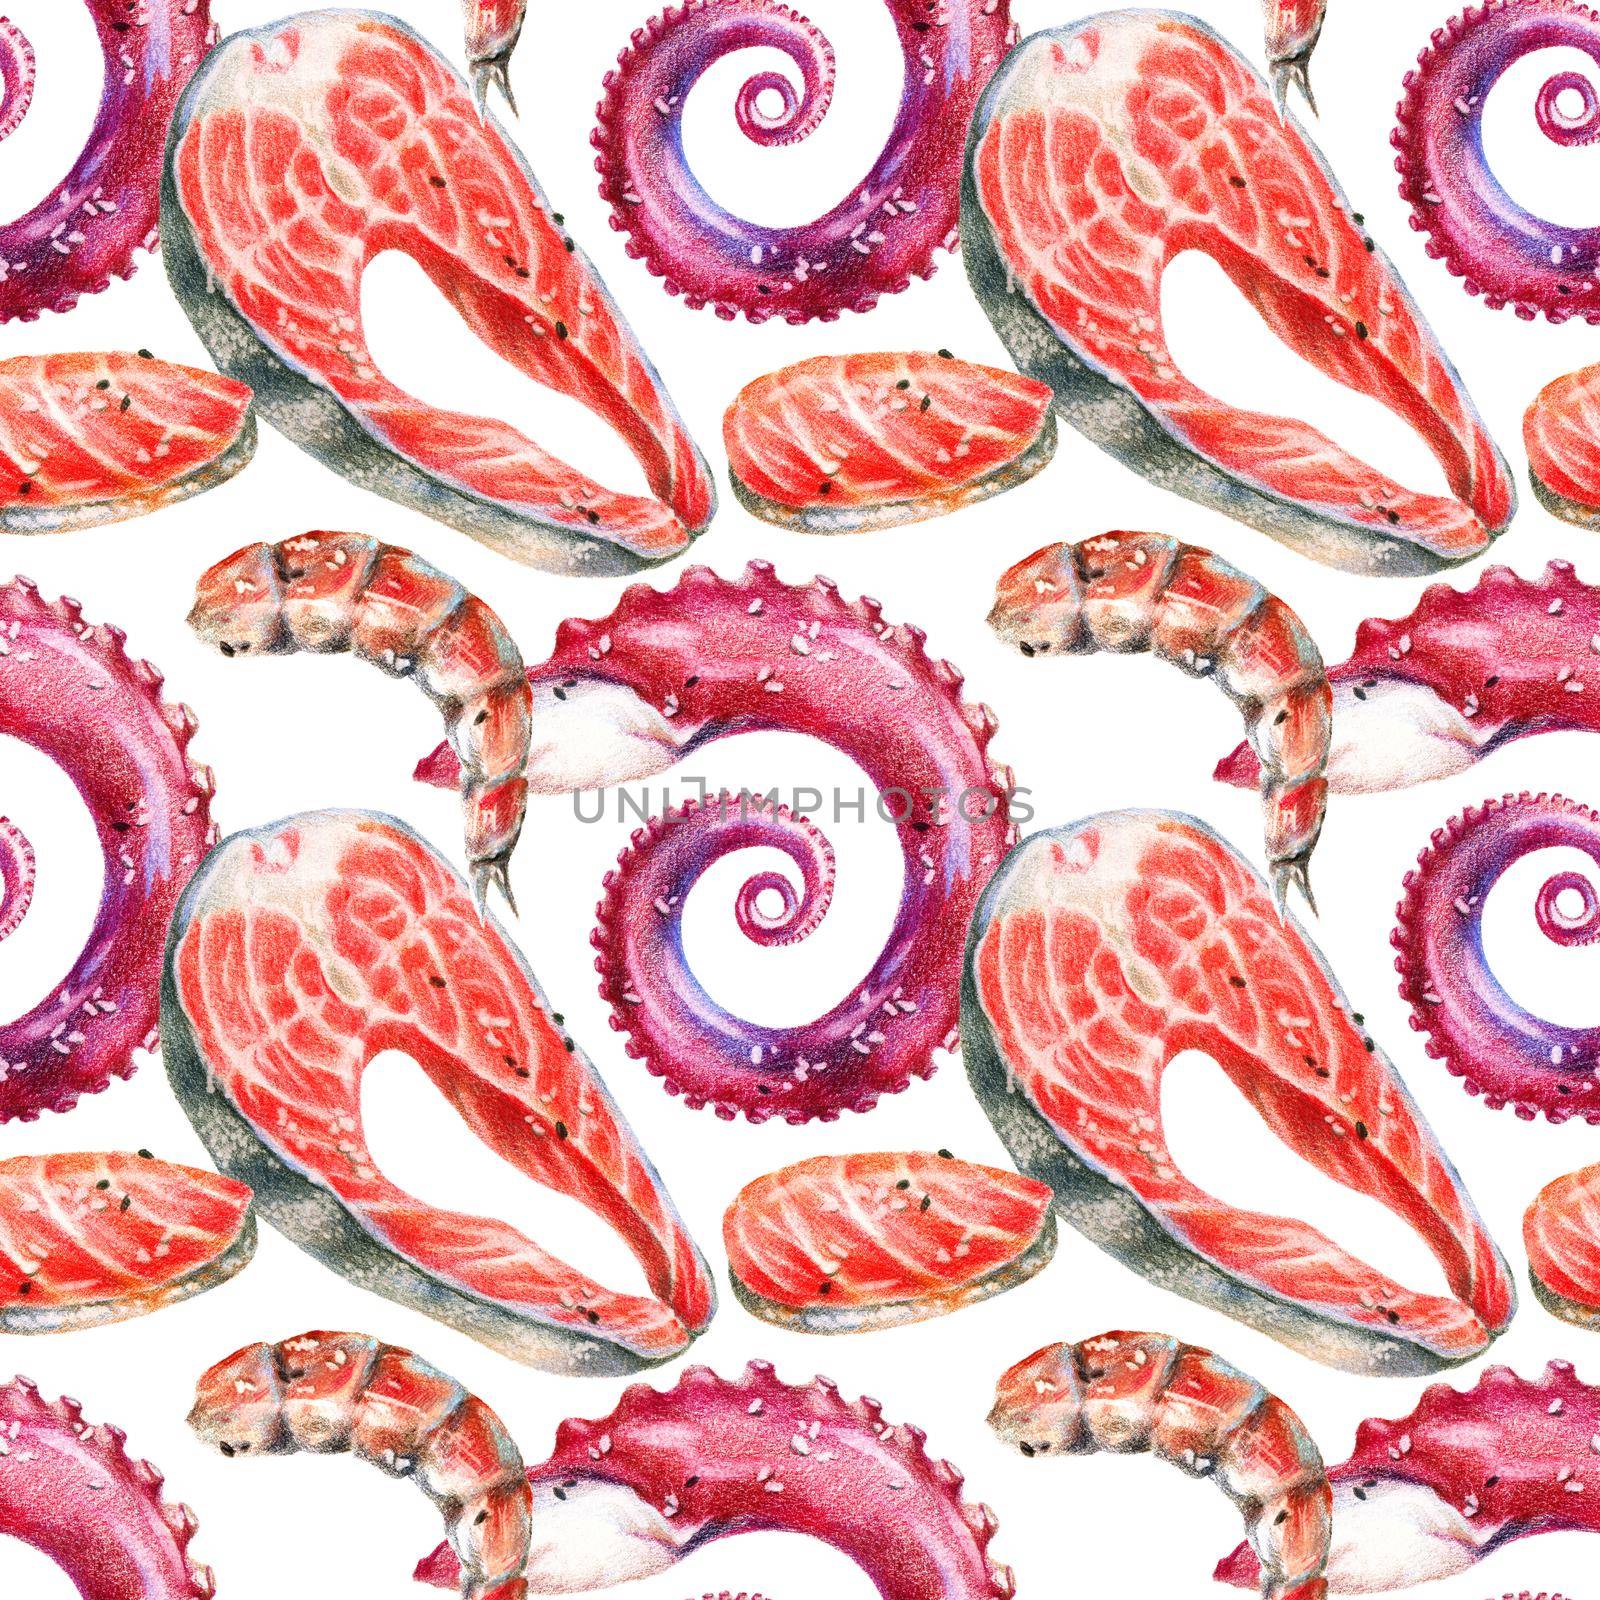 Color pencils realistic illustration of seafood - salmon steak, sushi, rolls, octopus tentacle and shrimp. Seamless pattern. Hand-drawn objects on white background.